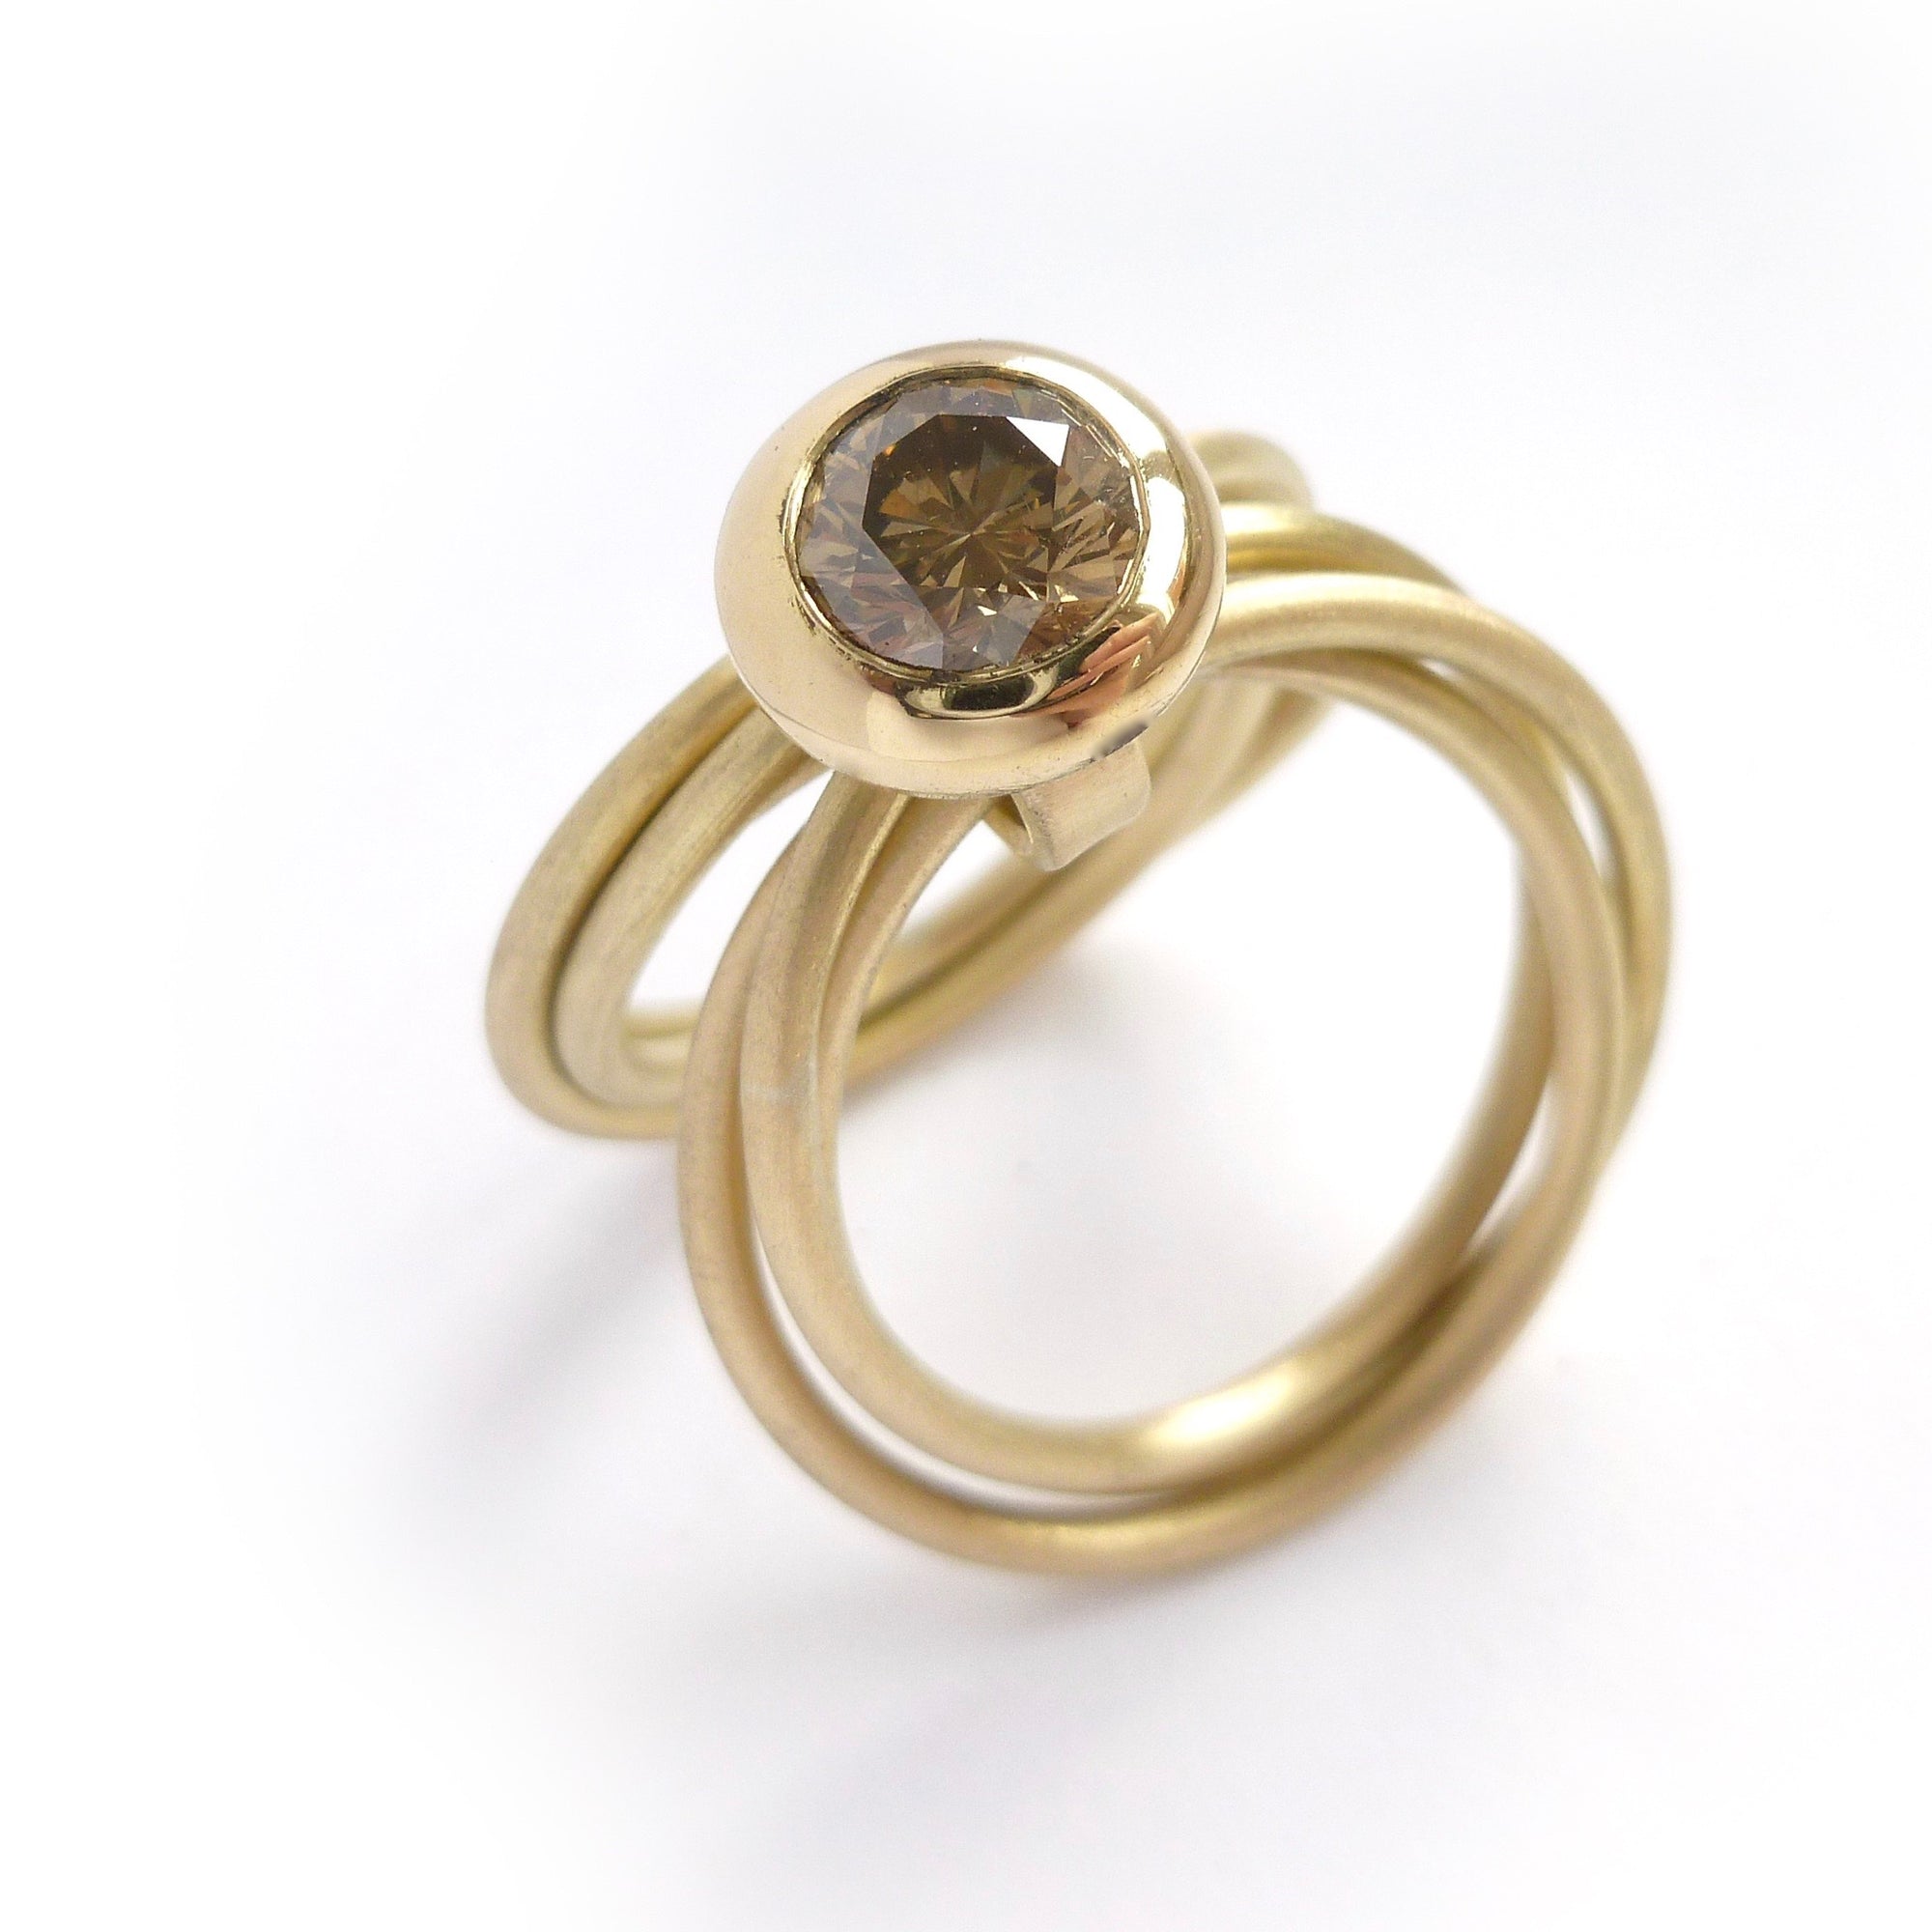 Contemporary Russian style wedding or engagement ring - bespoke and handmade. 